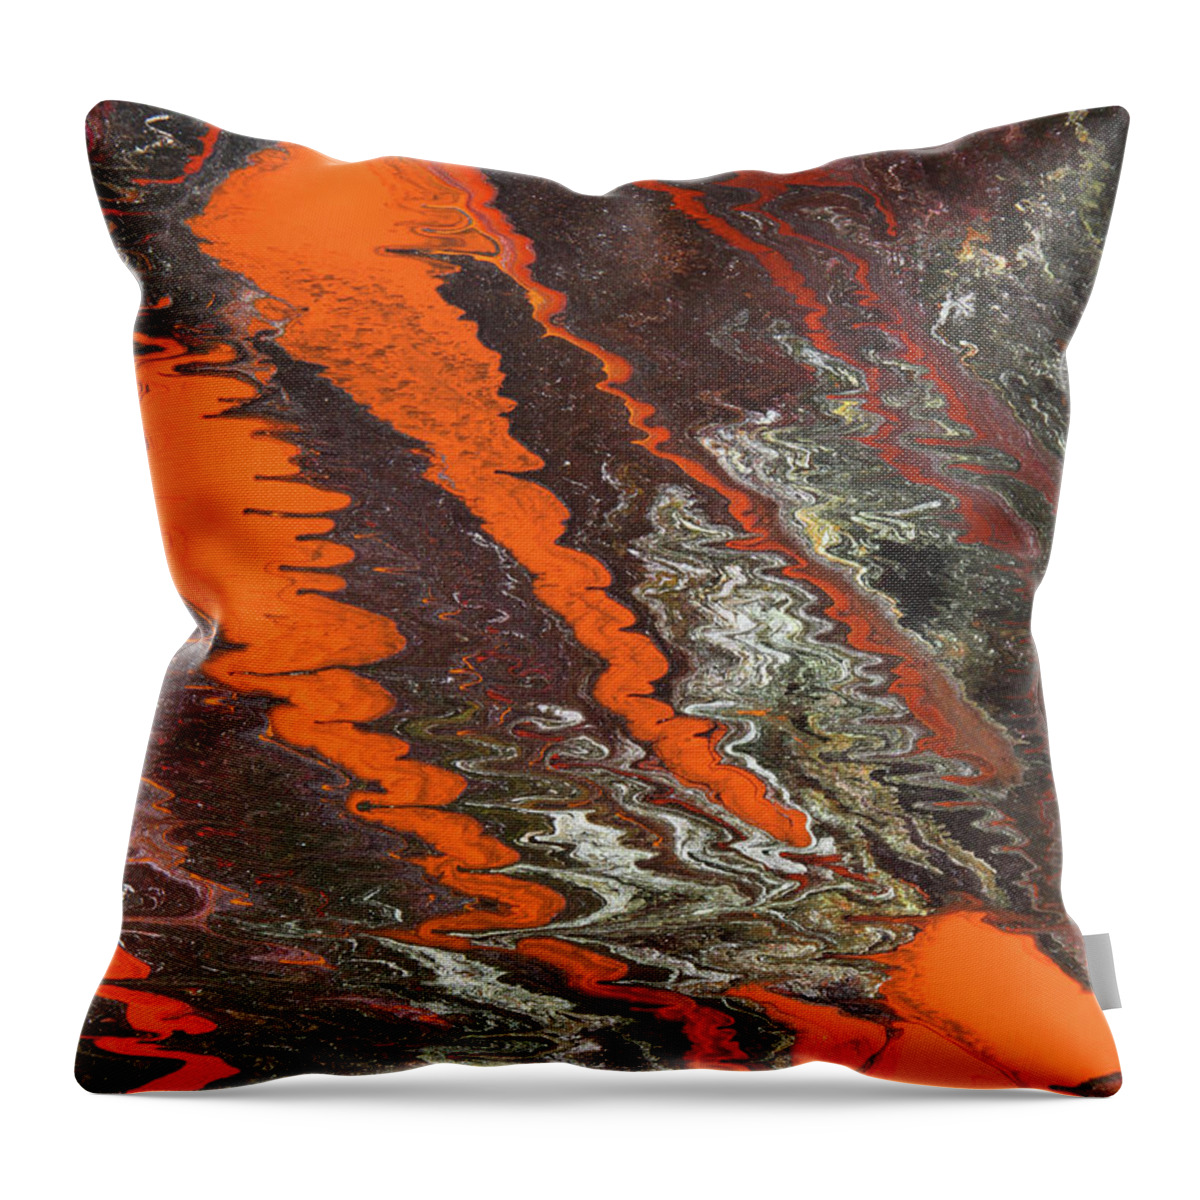 Fusionart Throw Pillow featuring the painting Convey by Ralph White